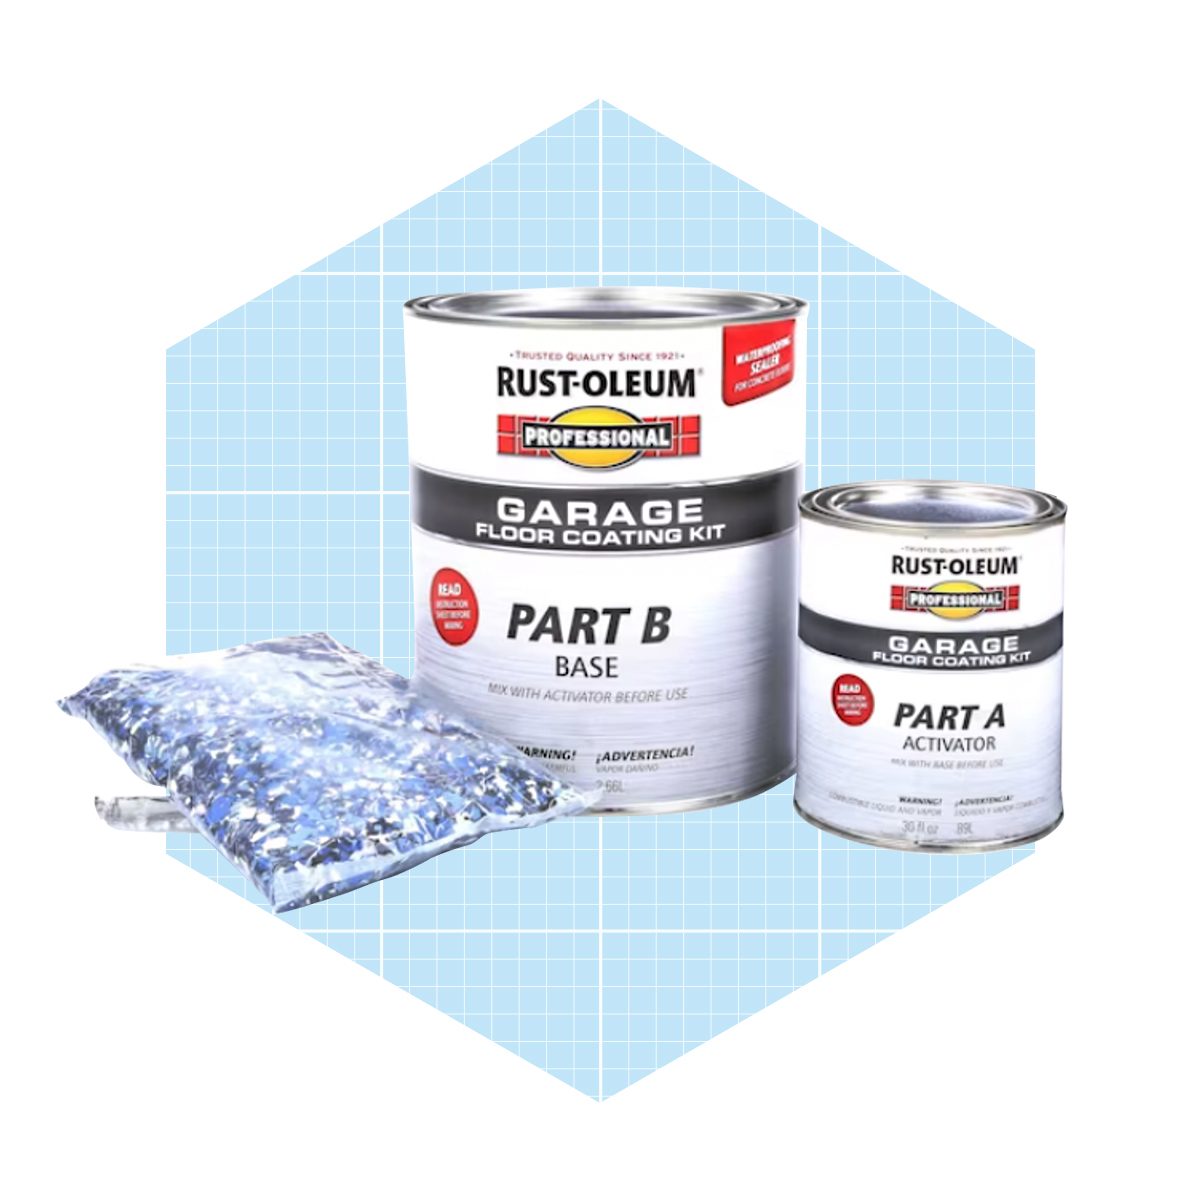 Finding the Best Waterproof Paint for Cement Surfaces - GZ